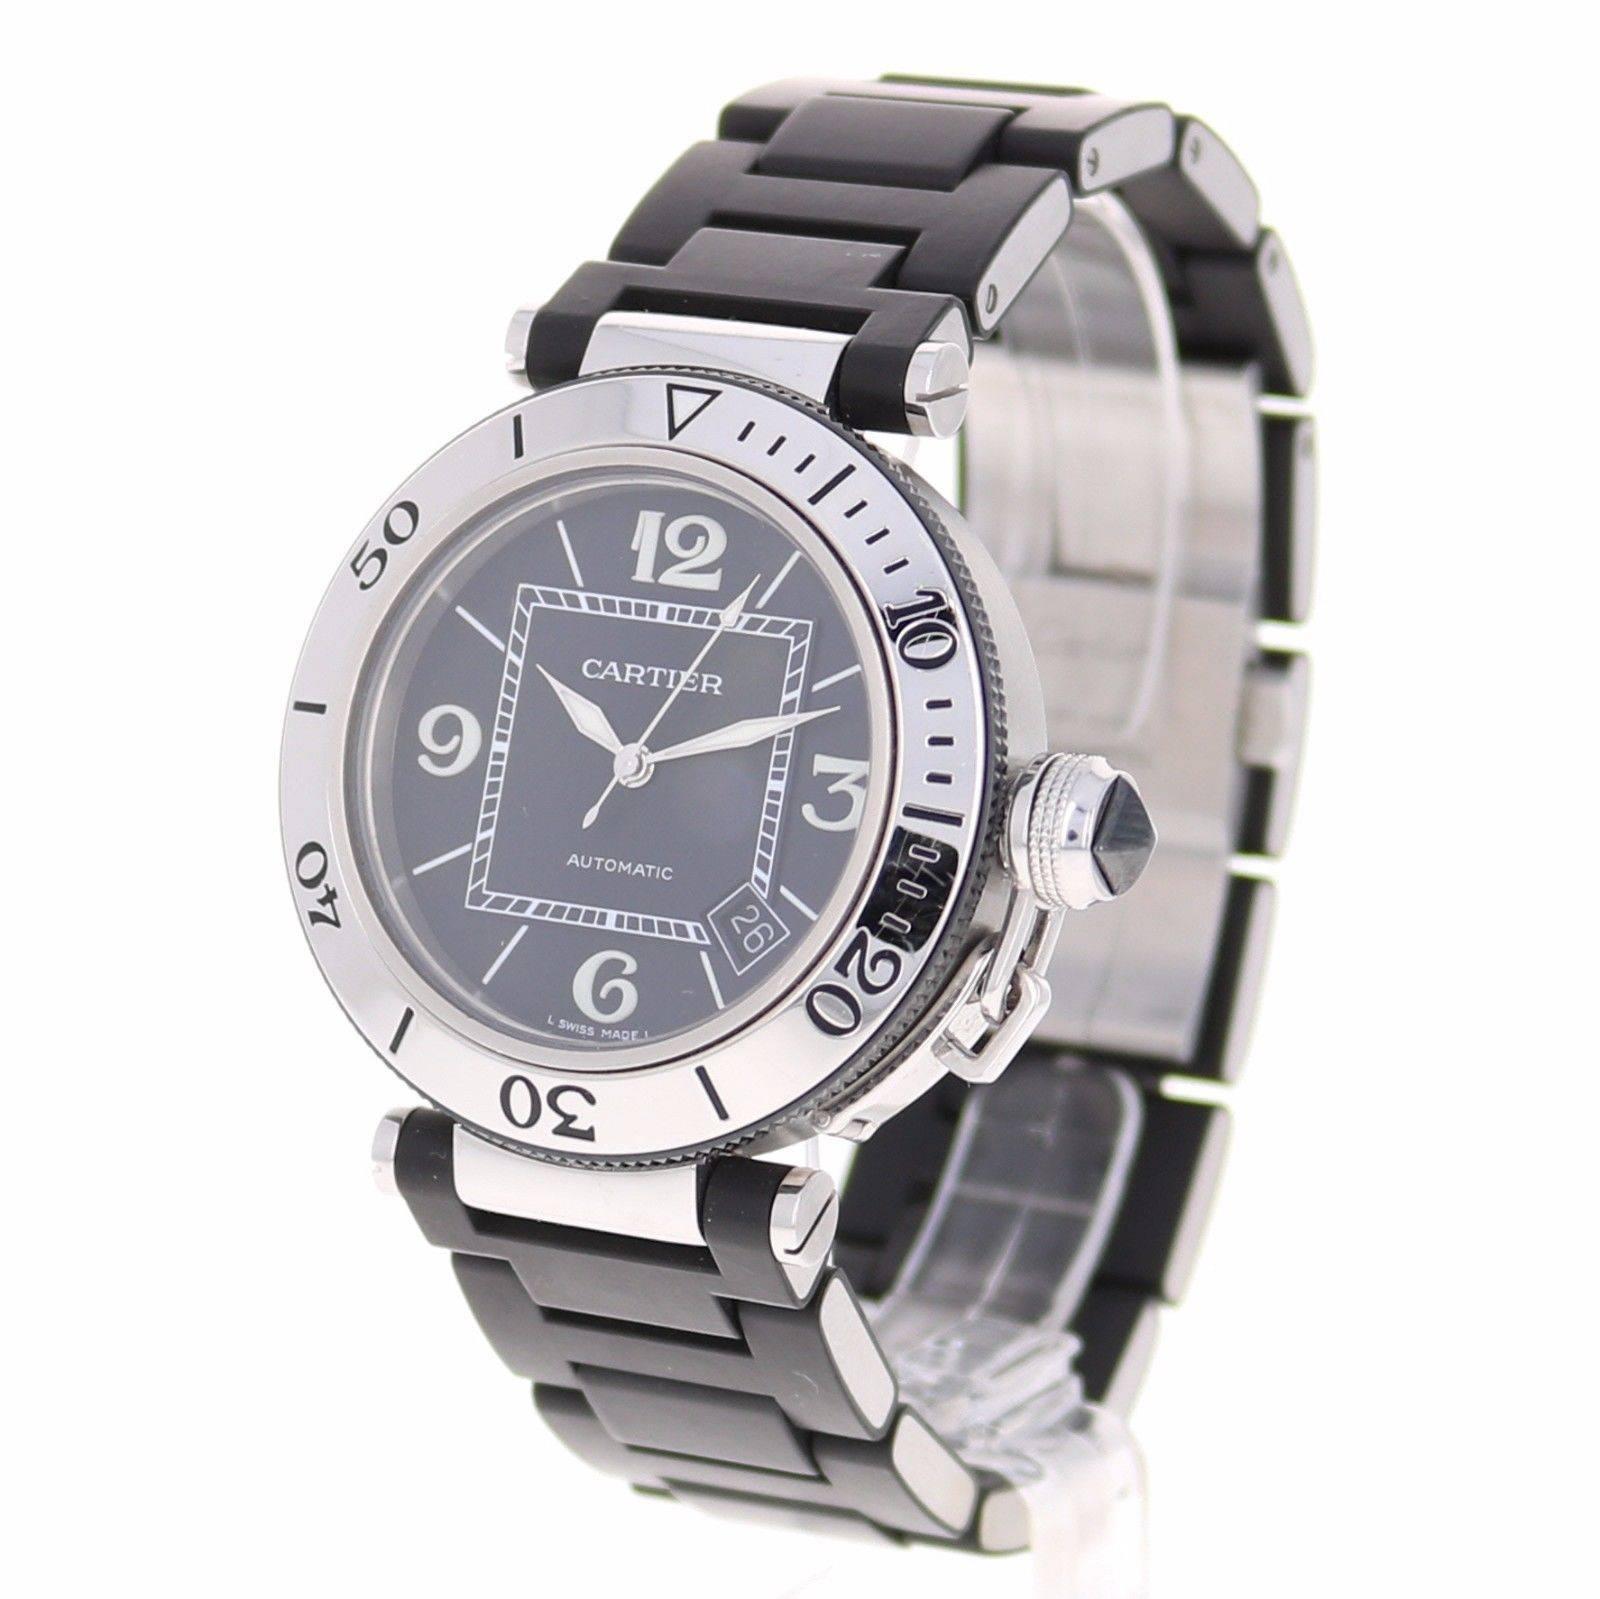 Men's Cartier Stainless Steel Pasha Seatimer Rubber Automatic Wristwatch